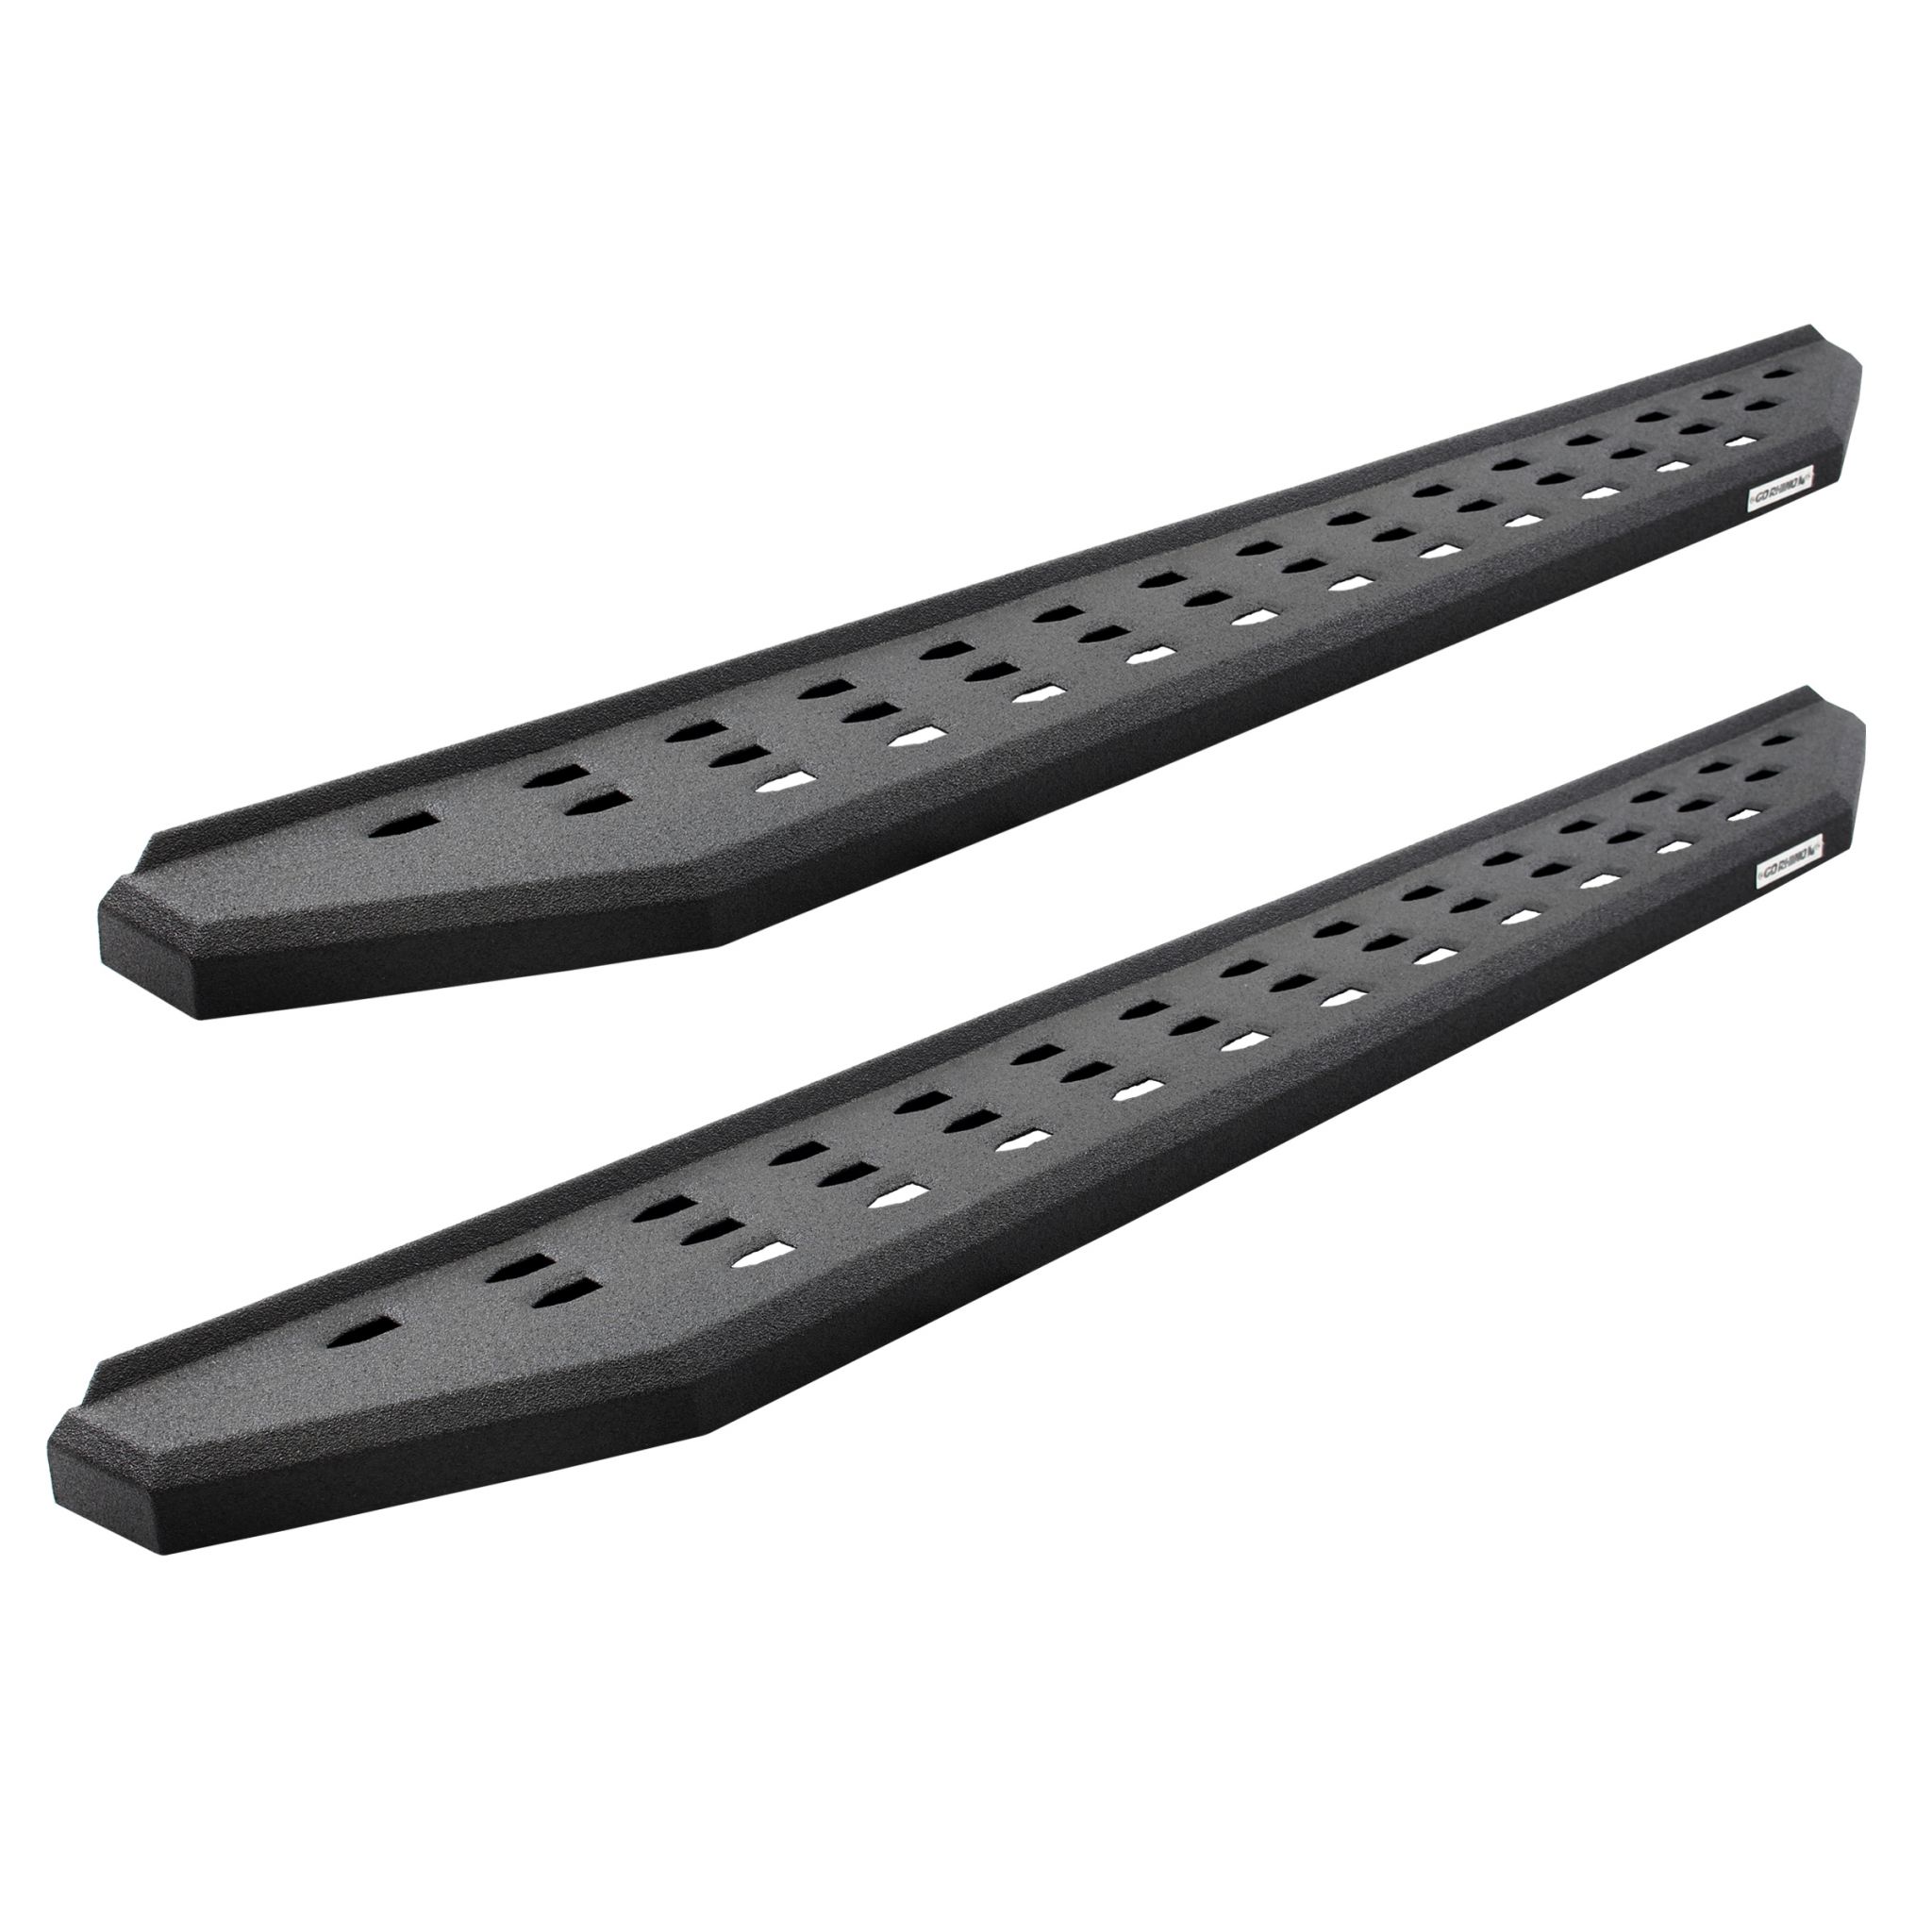 Go Rhino 69400087T - RB20 Running Boards - BOARDS ONLY - Protective Bedliner Coating